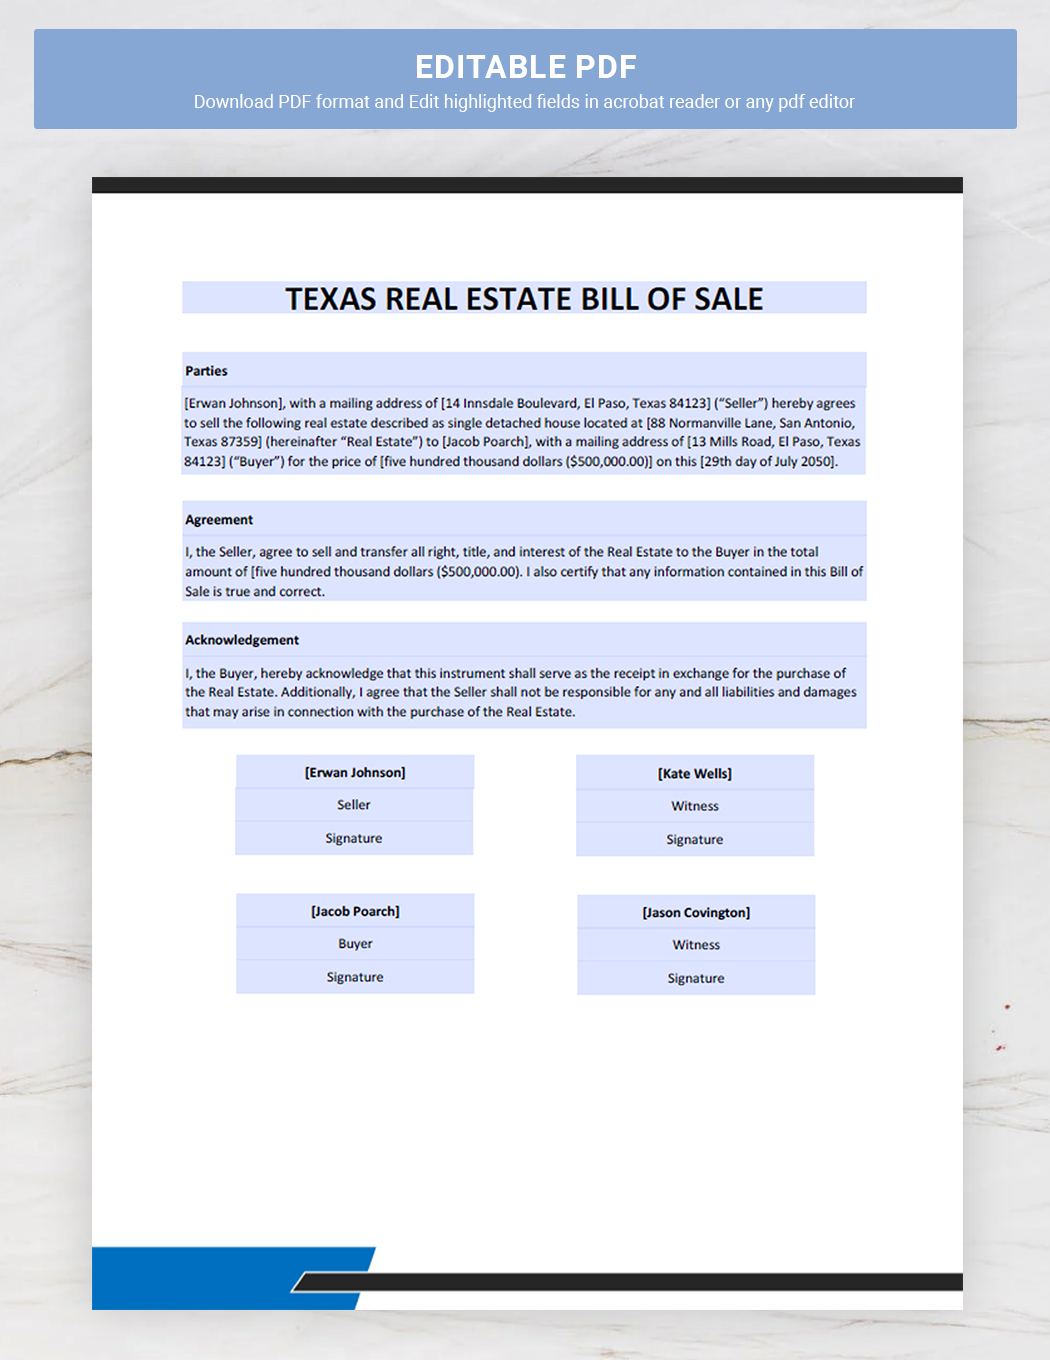 Texas Real Estate Bill of Sale Template